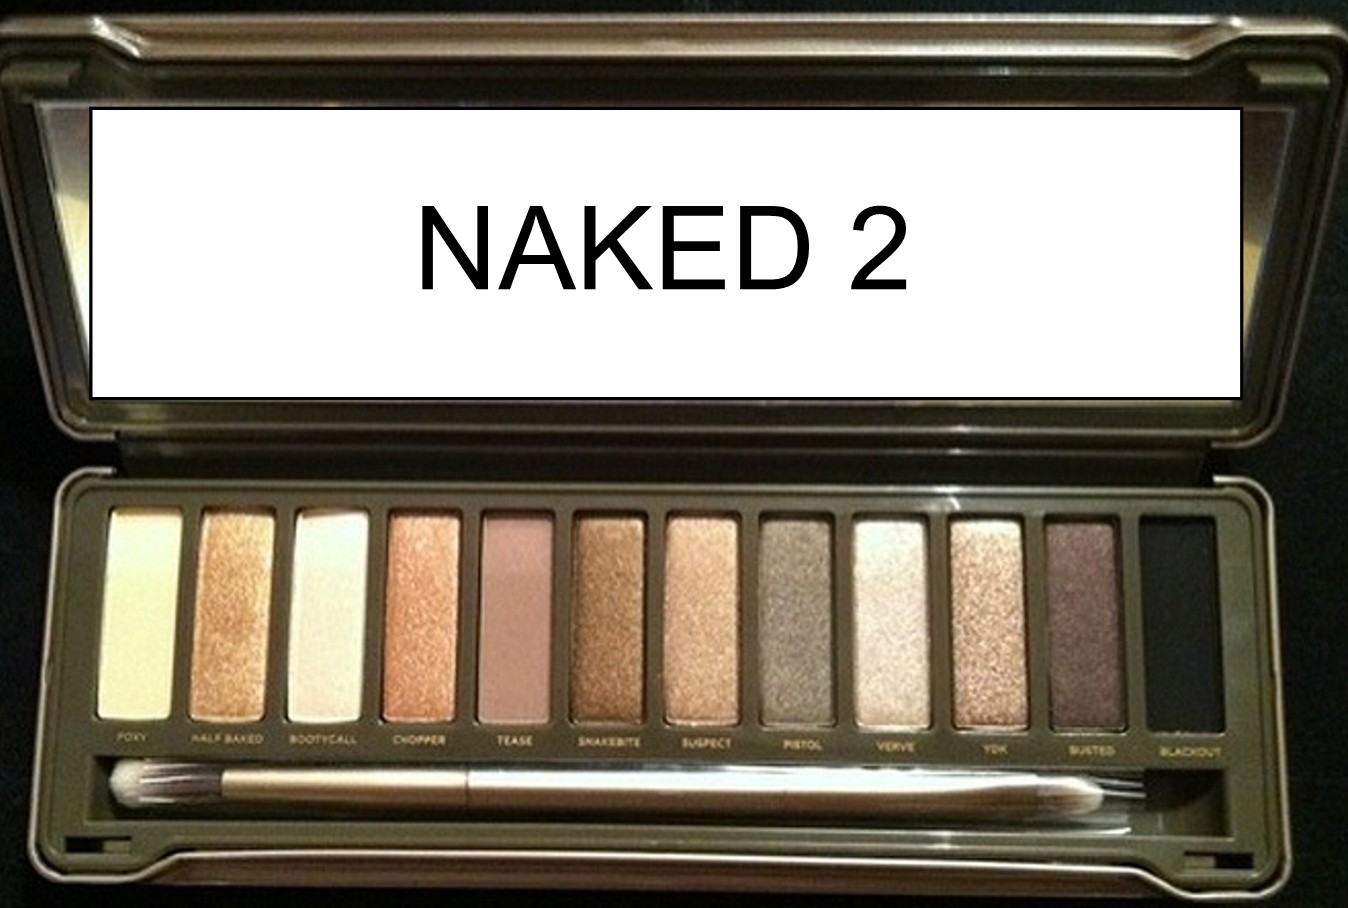 Shana Lee, Foodie, Beauty, and More: Urban Decay NAKED 2!